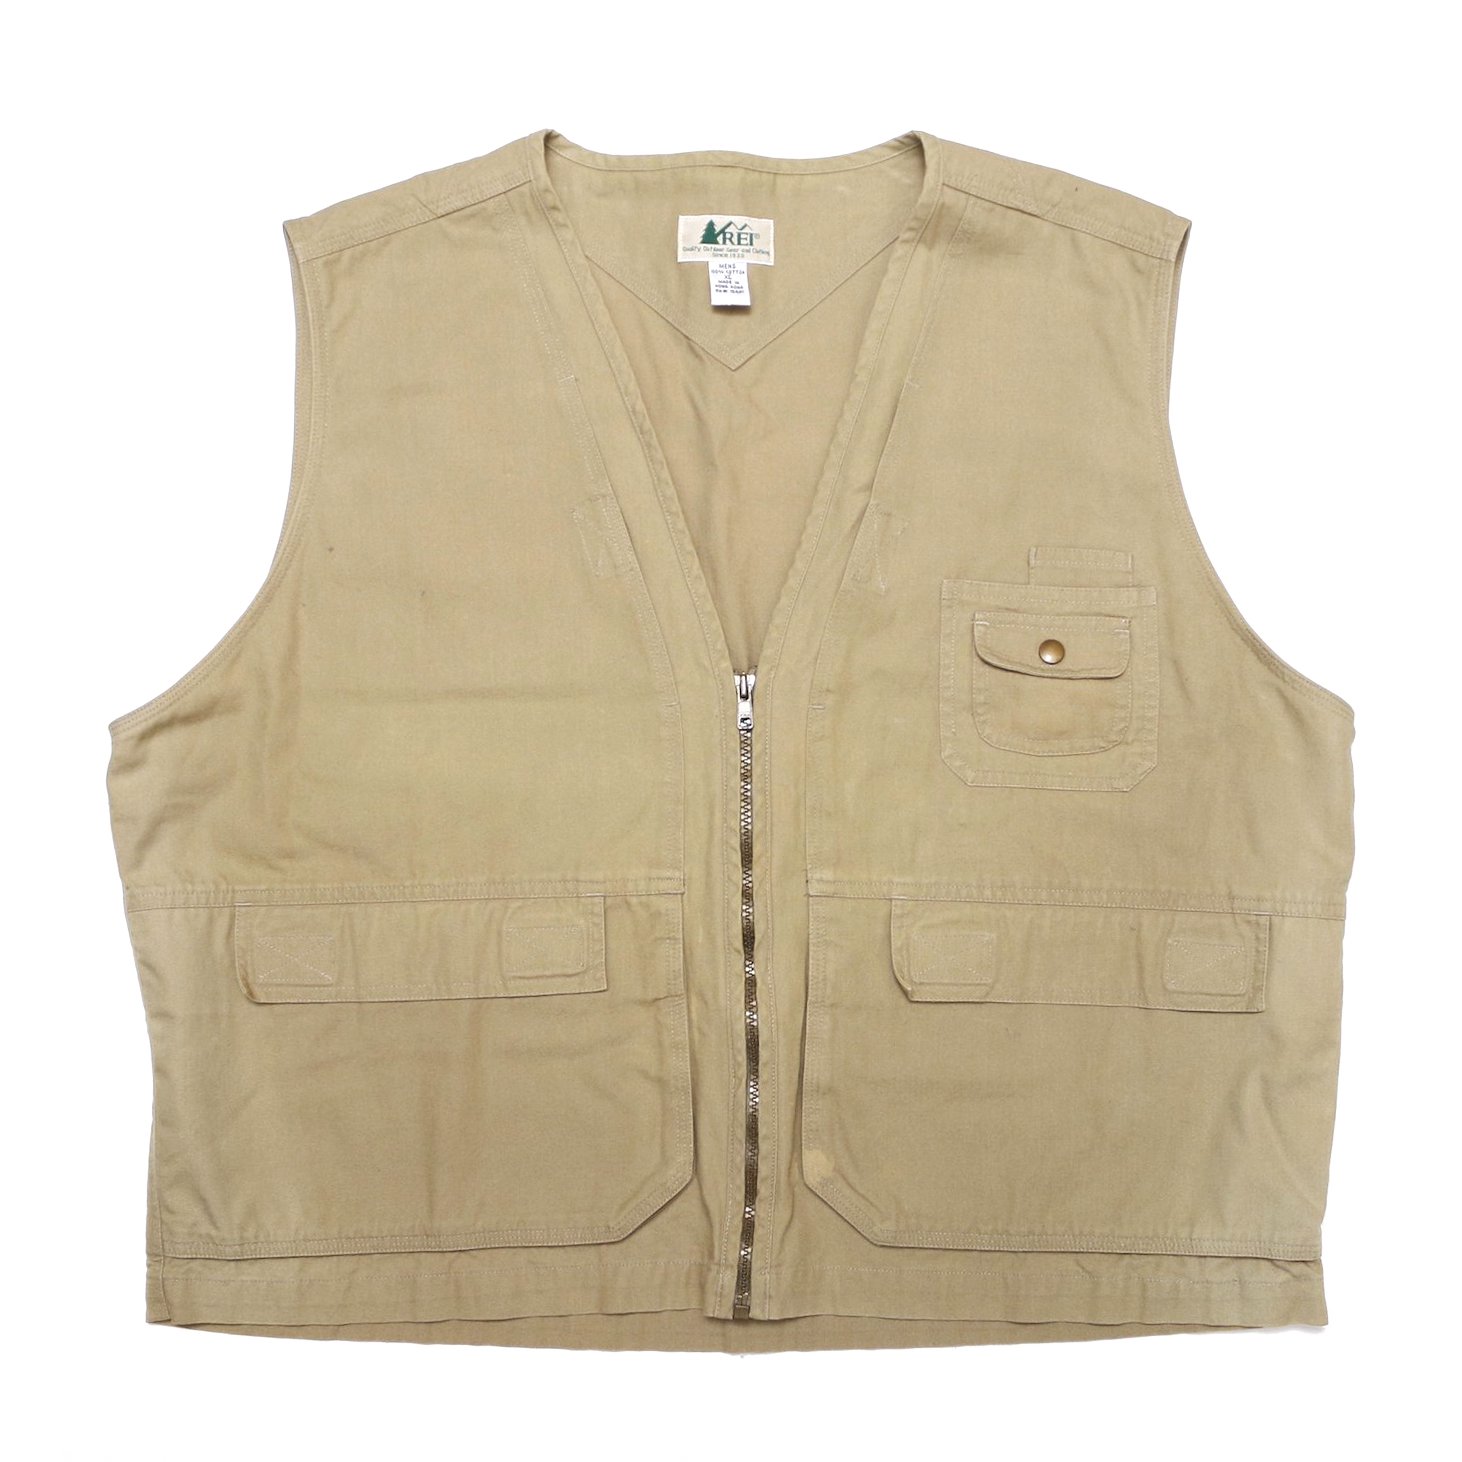 <img class='new_mark_img1' src='https://img.shop-pro.jp/img/new/icons20.gif' style='border:none;display:inline;margin:0px;padding:0px;width:auto;' />Vintage Clothes / 90's Vest